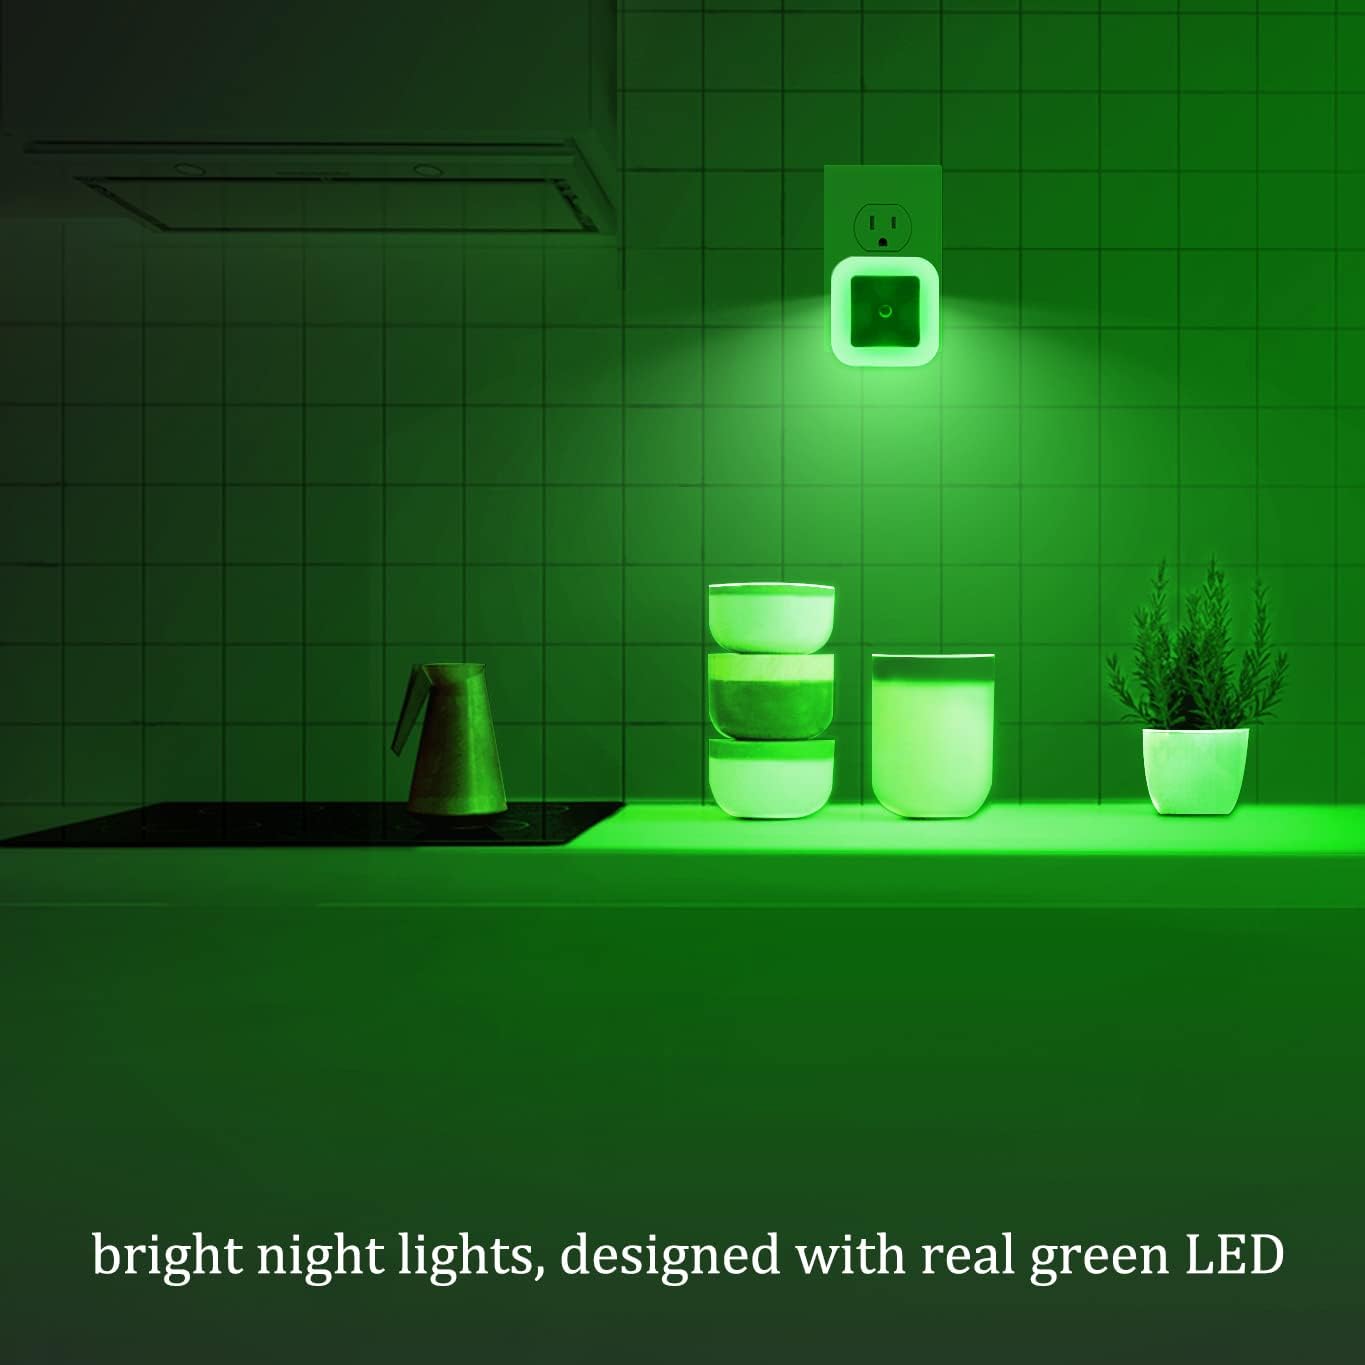 Elsent [Pack of 2] Bright Green Night Lights, Plug Into LED Wall Lights with Light Sensor, Auto ON/Off- Suitable for Bathroom, Hallway and Kitchen